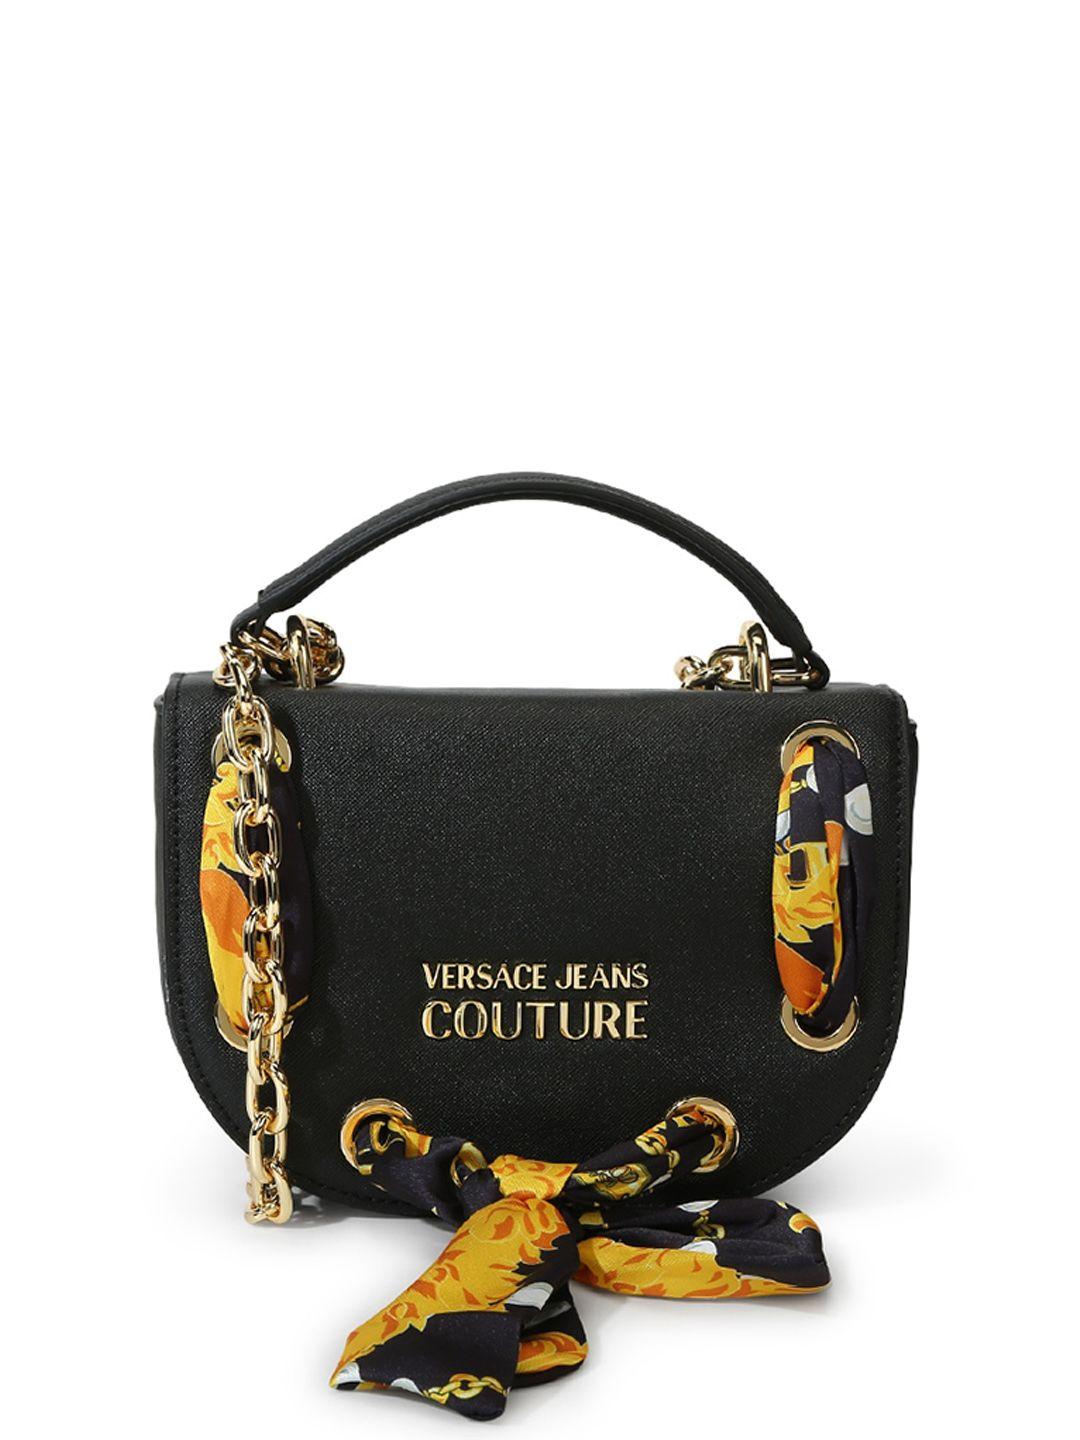 versace jeans couture textured structured handheld bag with scarf